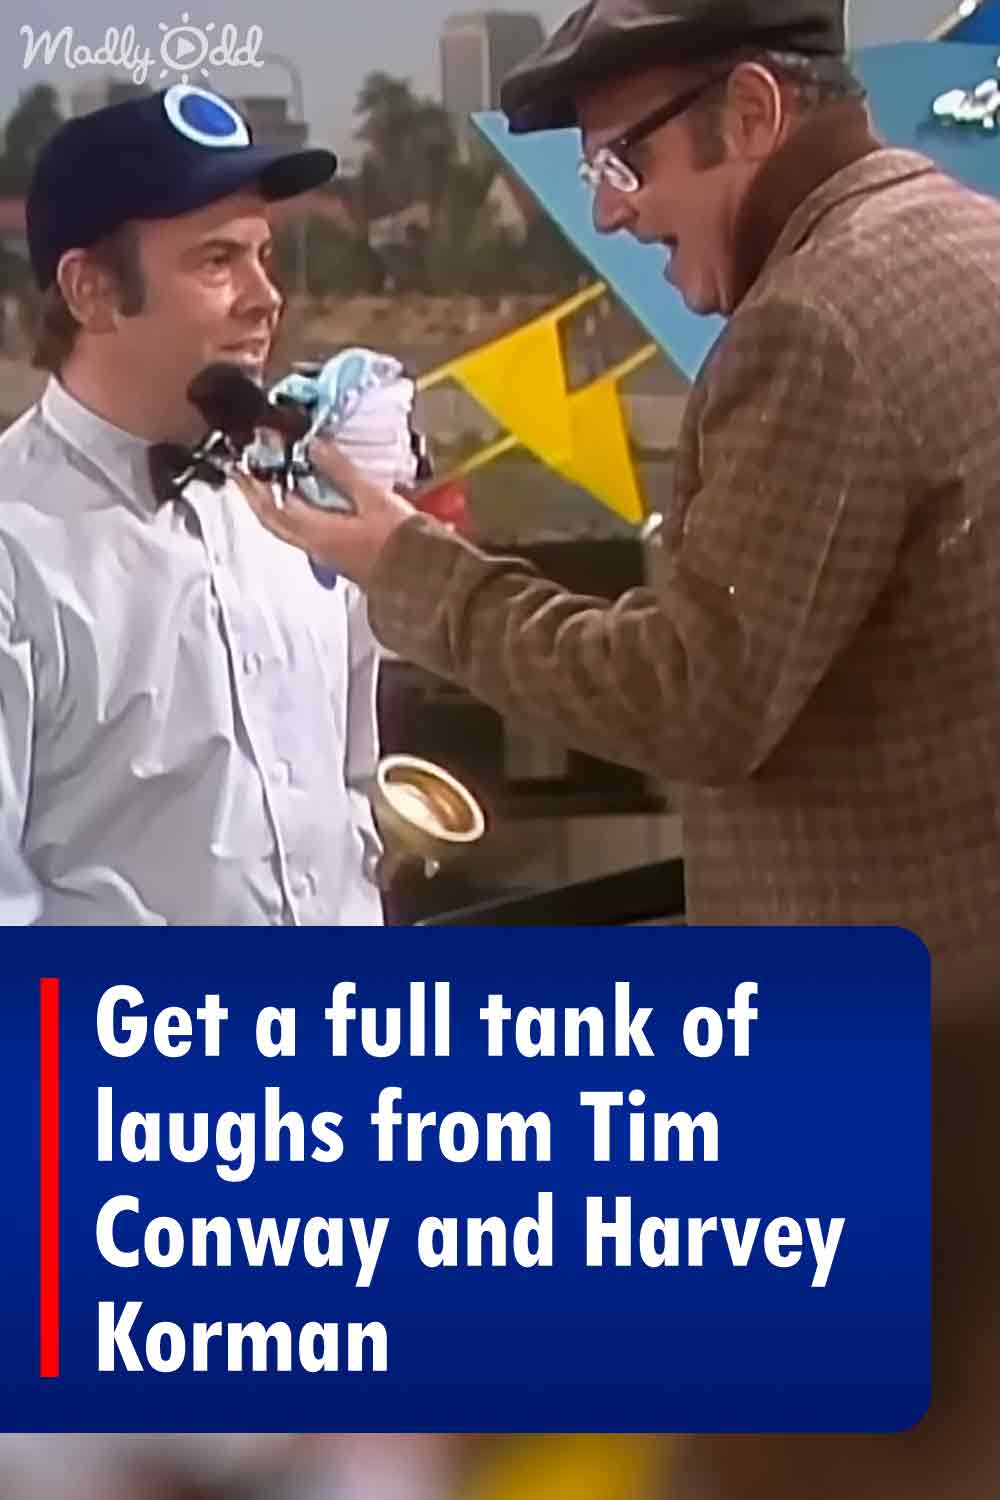 Get a full tank of laughs from Tim Conway and Harvey Korman